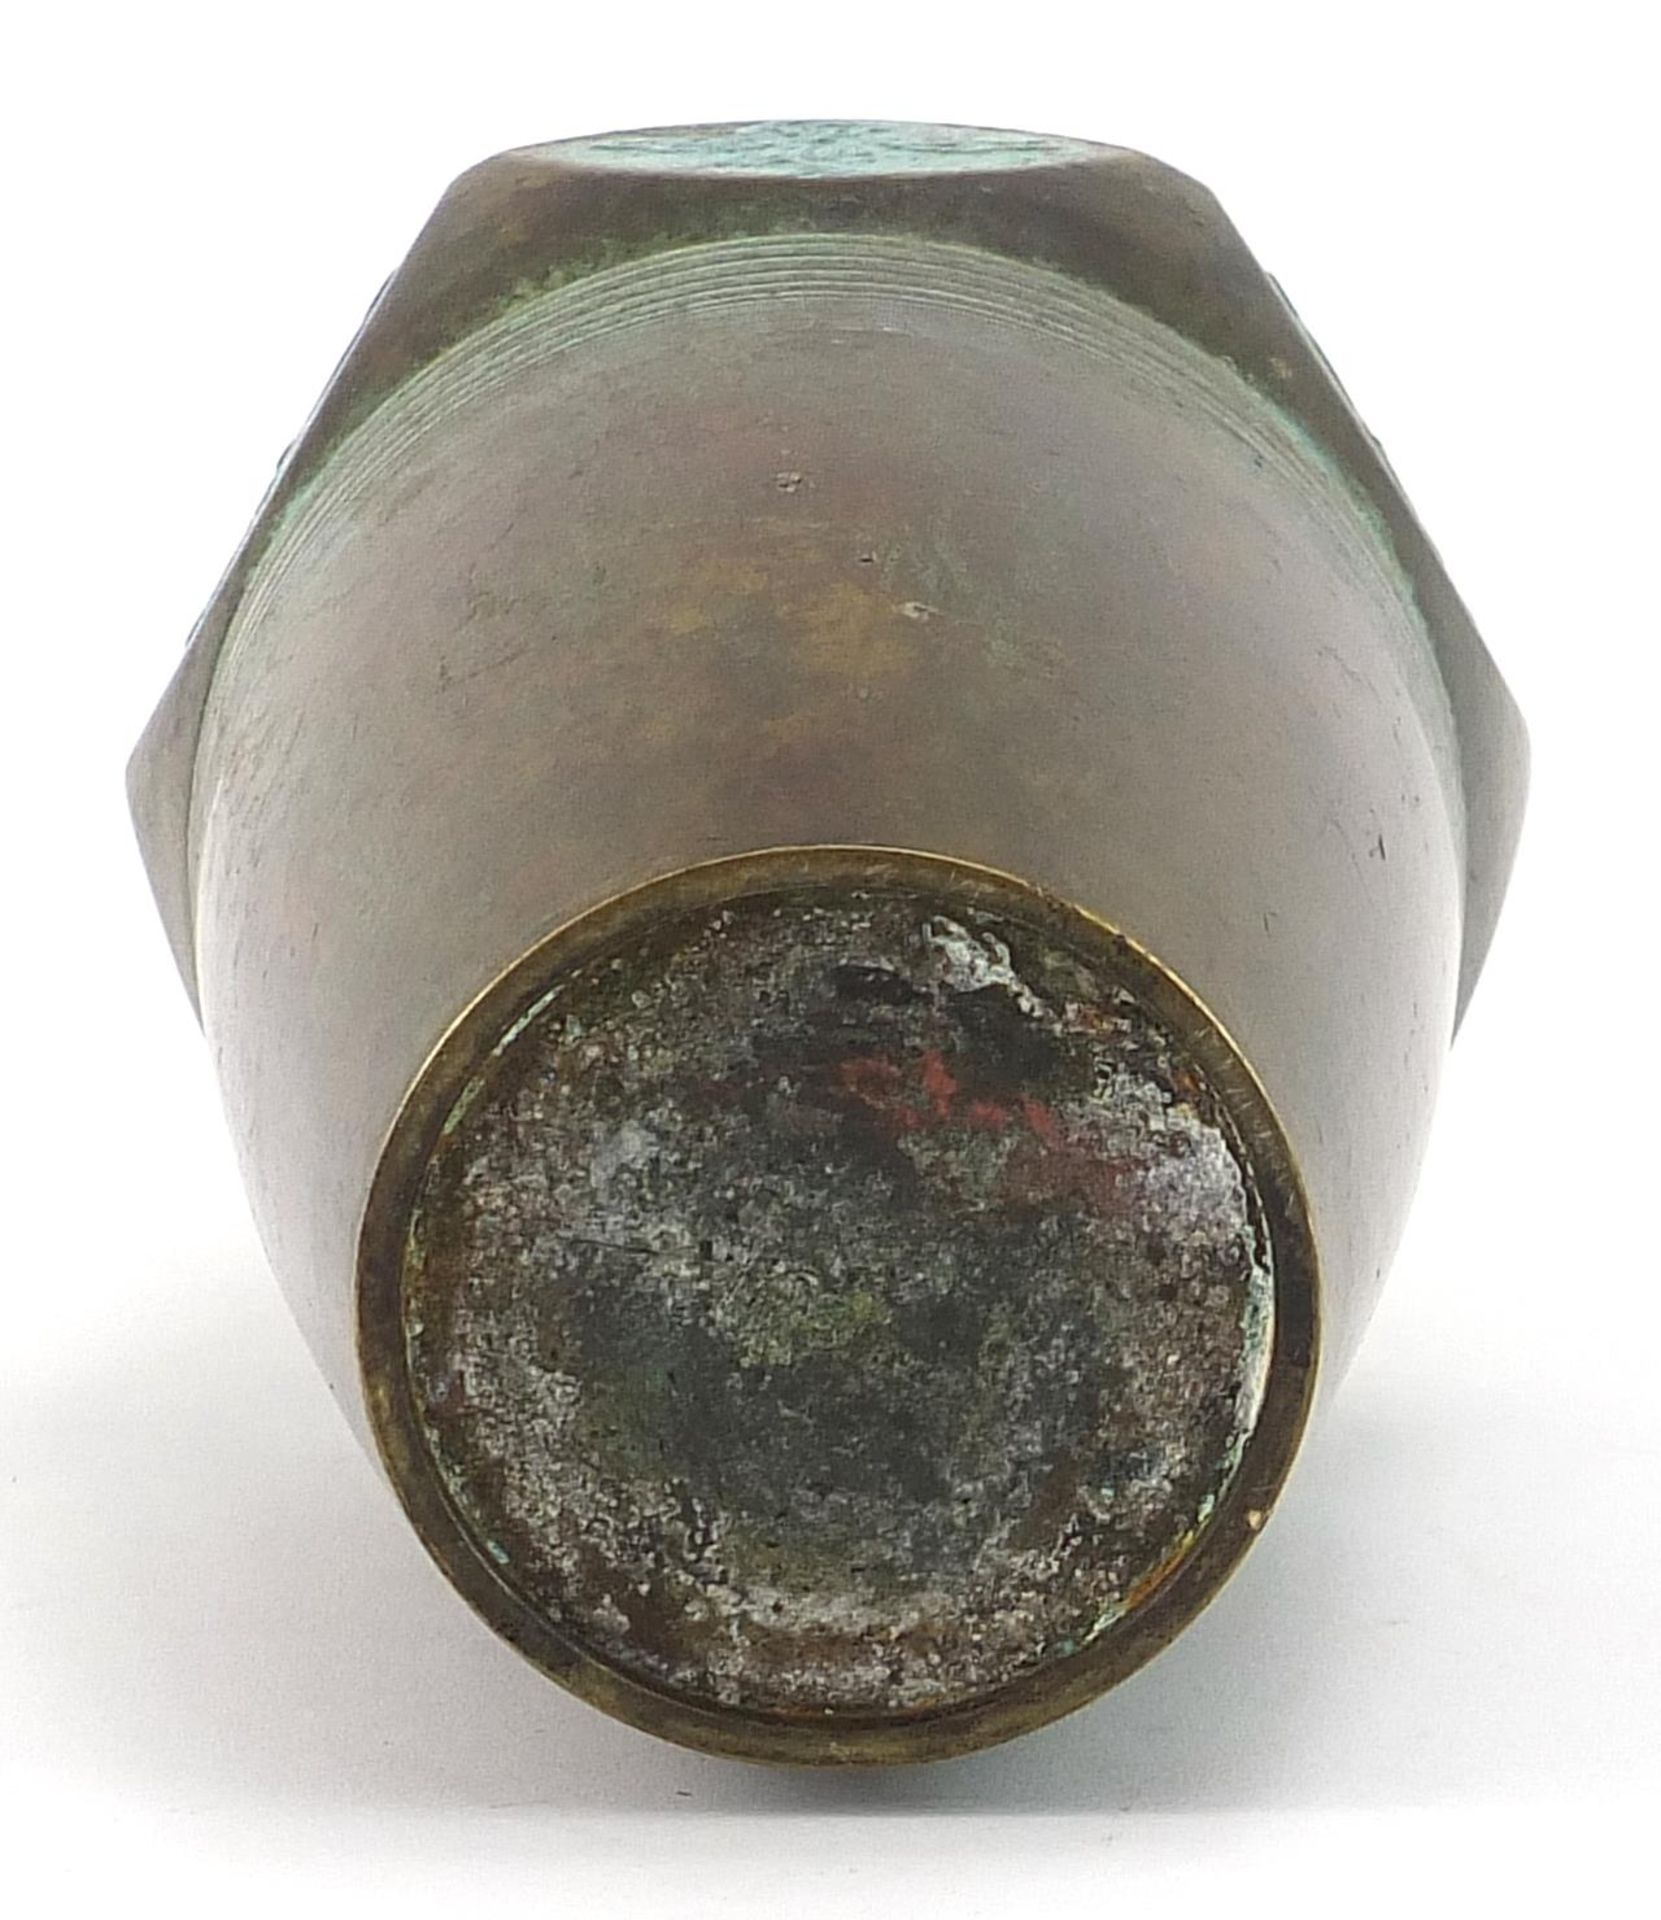 *WITHDRAWN*Modernist Japanese patinated bronze vase, 23cm high - Image 3 of 3